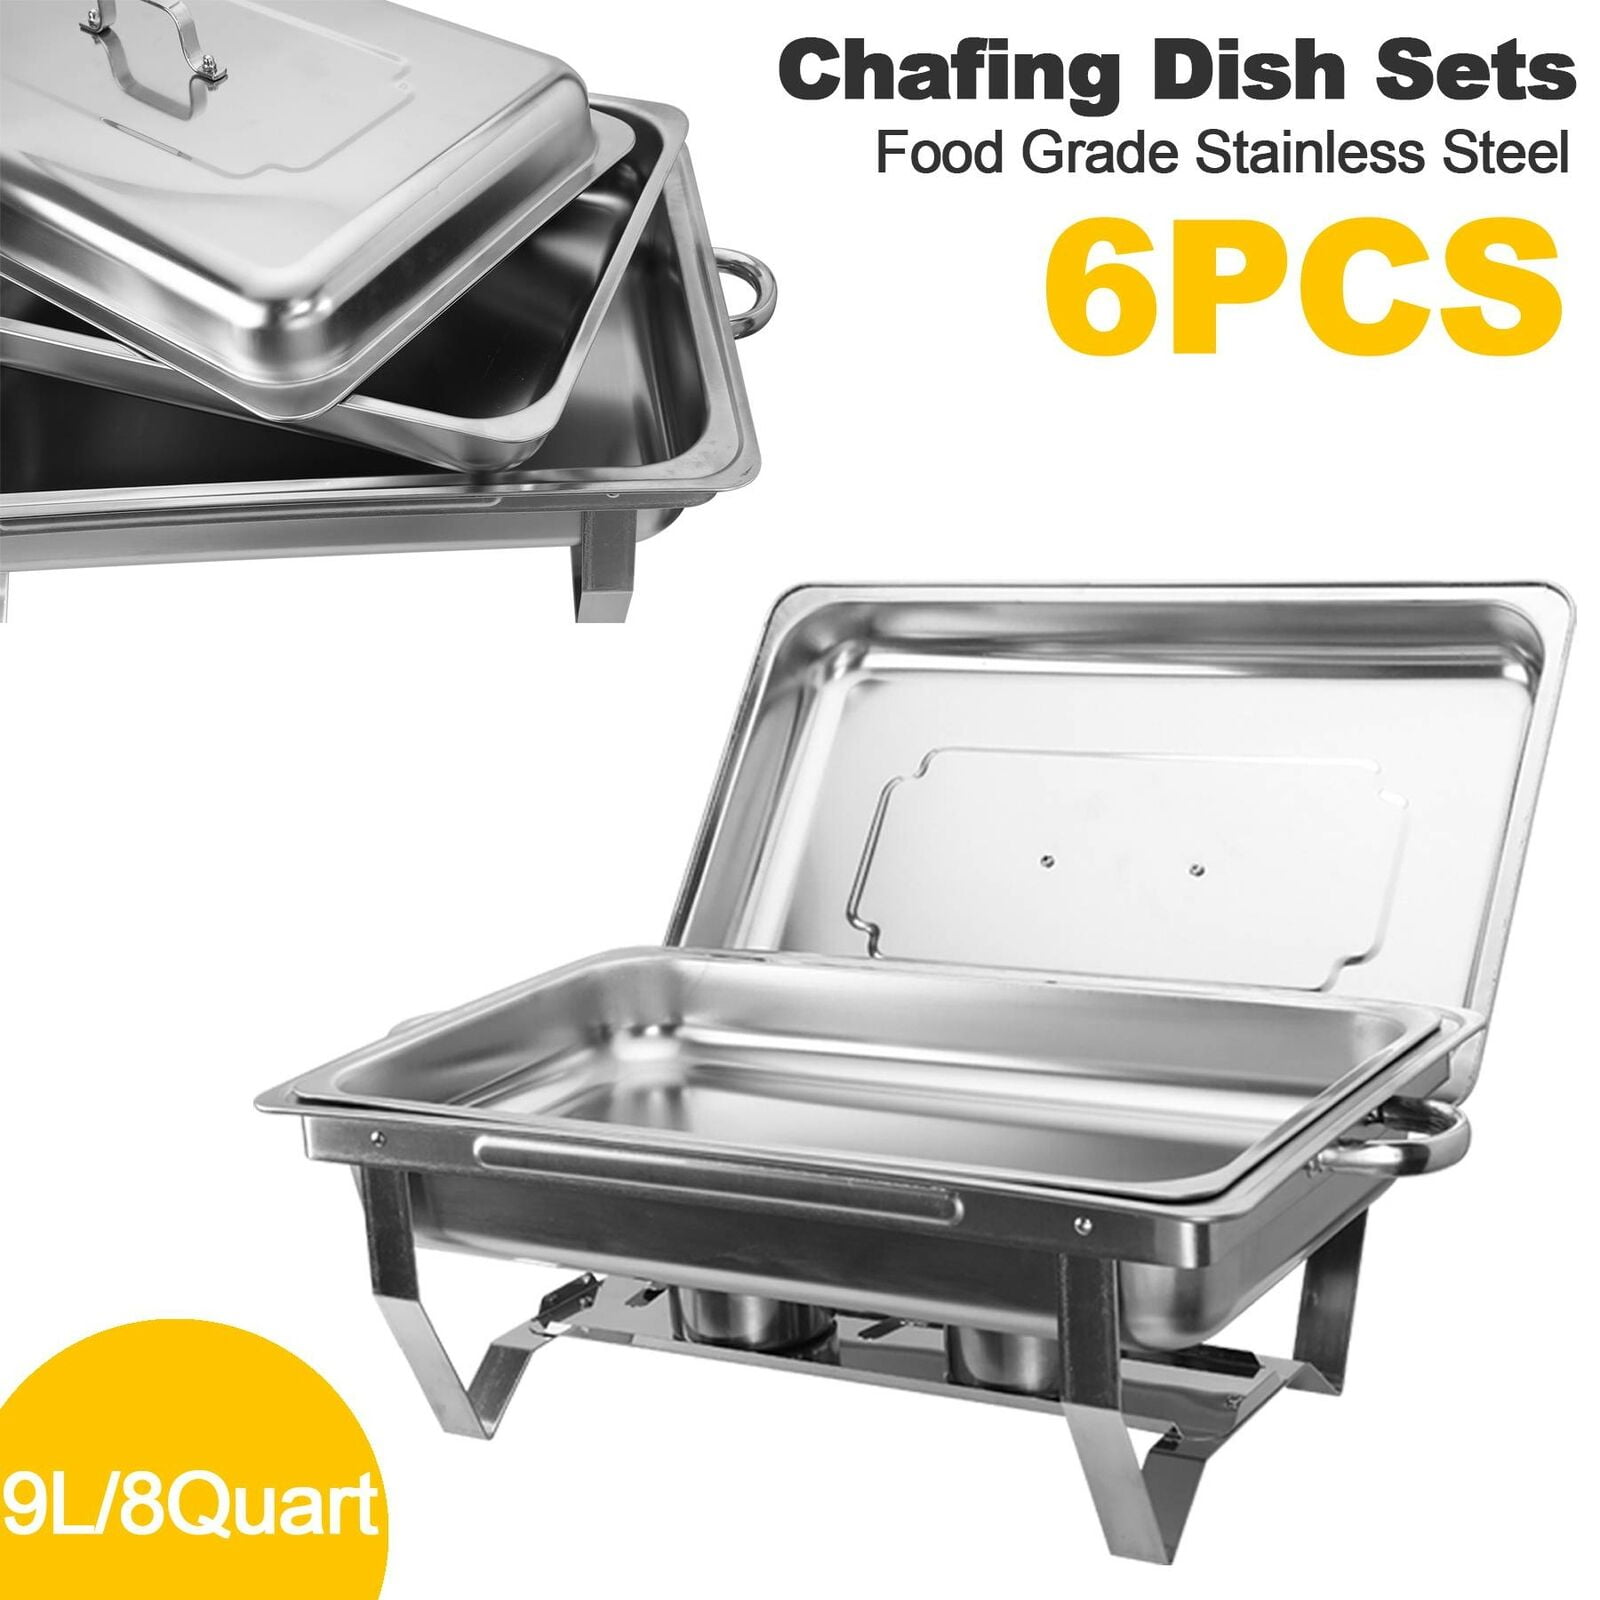 2 Pack Stainless Steel Chafing Dishes 9 Quart,1 and 2 Half Size Pans Combo,Catering Serve Chafer Warming Container,Rectangular Chafer Complete Chafing Dish Set for Celebration,Party,Kitchen Dining 